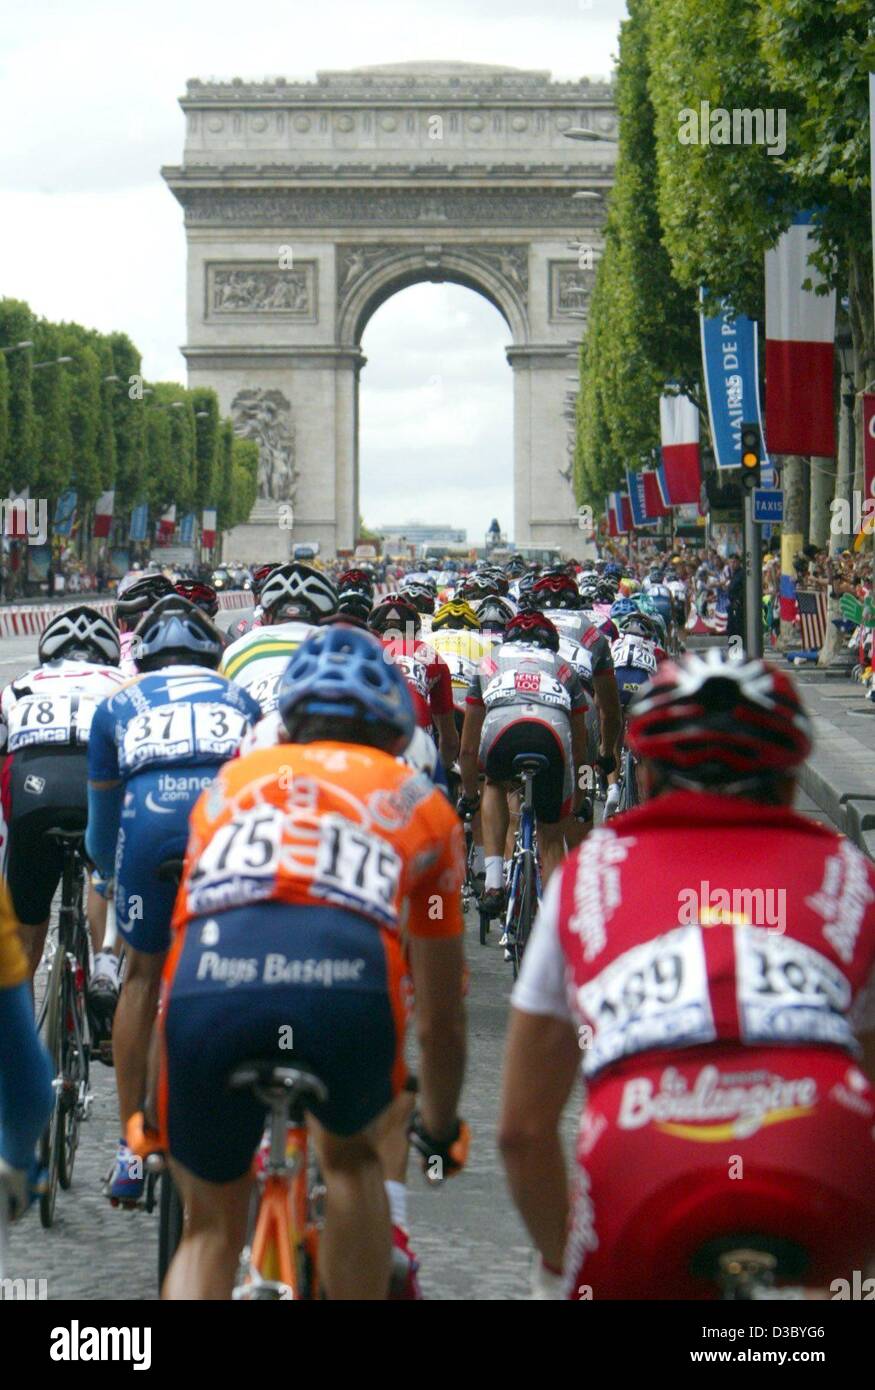 (dpa) - Cyclists approach a famous Parisian landmark, the Arc de Triomphe, as they ride over the Champs-Elysees during the 20th stage of the 2003 Tour de France cycling race in Paris, 27 July 2003. The 152km long final stage of the Tour leads the cyclists from Ville-d'Avray to the finish on the Cham Stock Photo